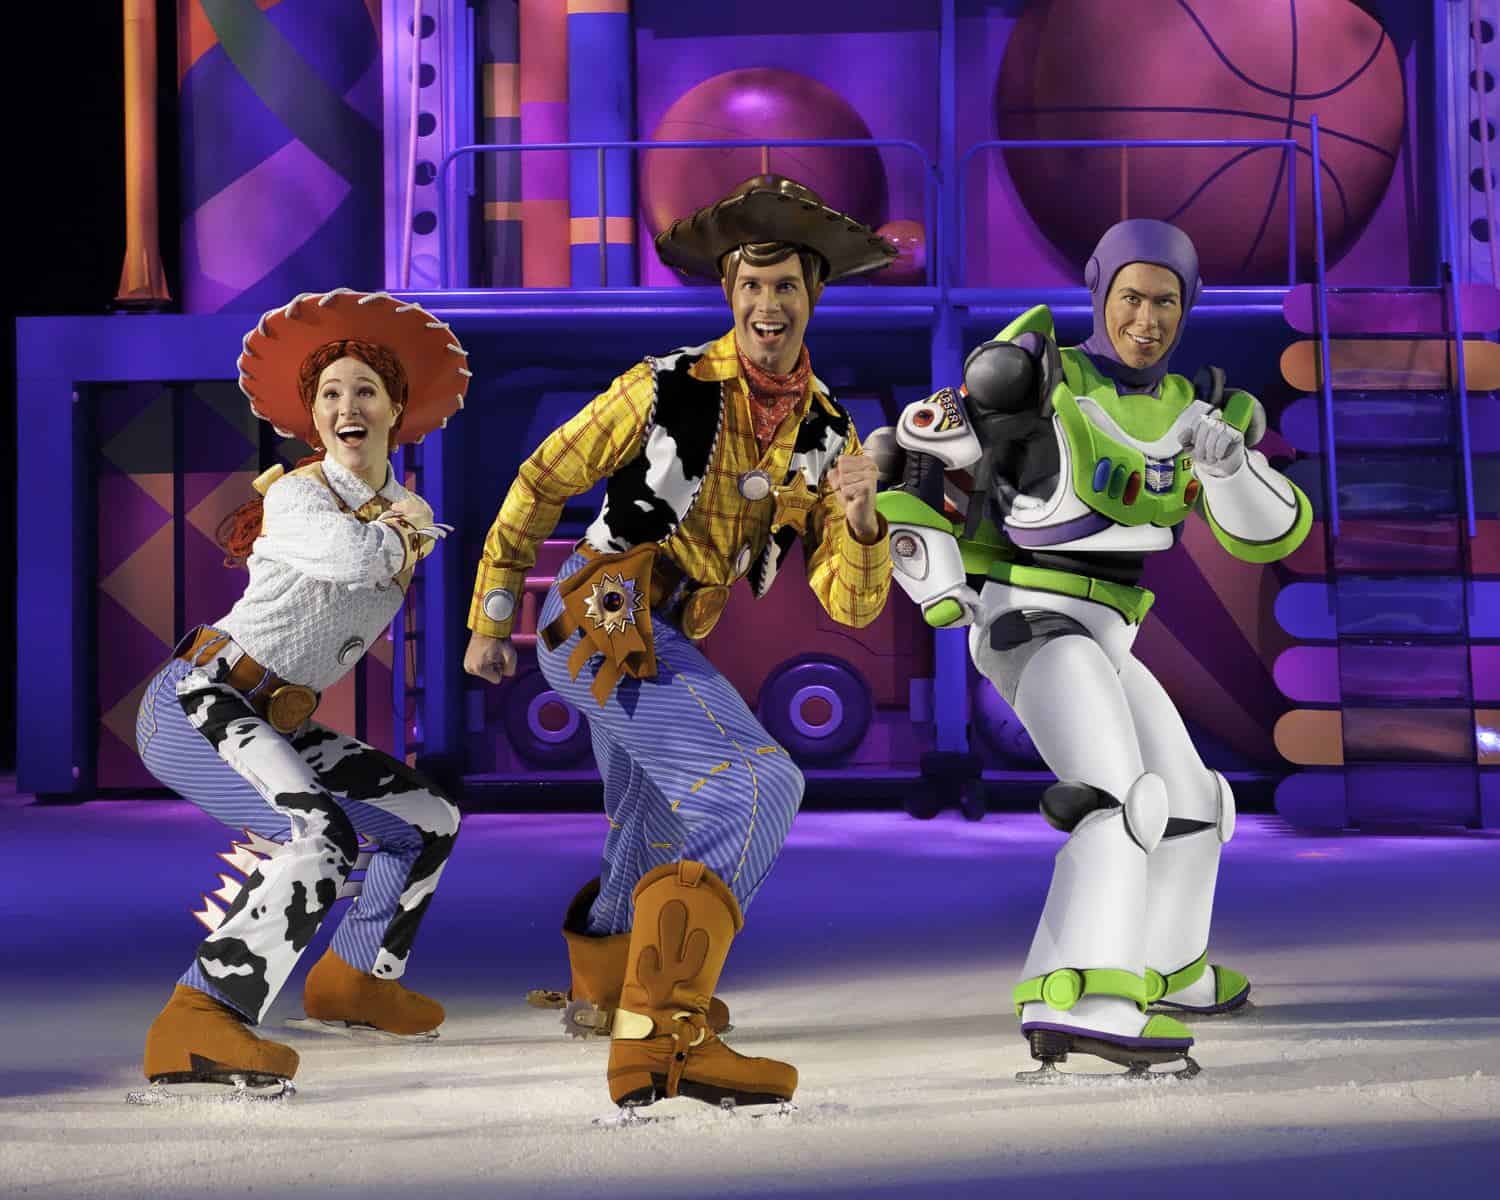 Toy Story characters on ice skates as part of Disney on Ice Worlds of Enchantment